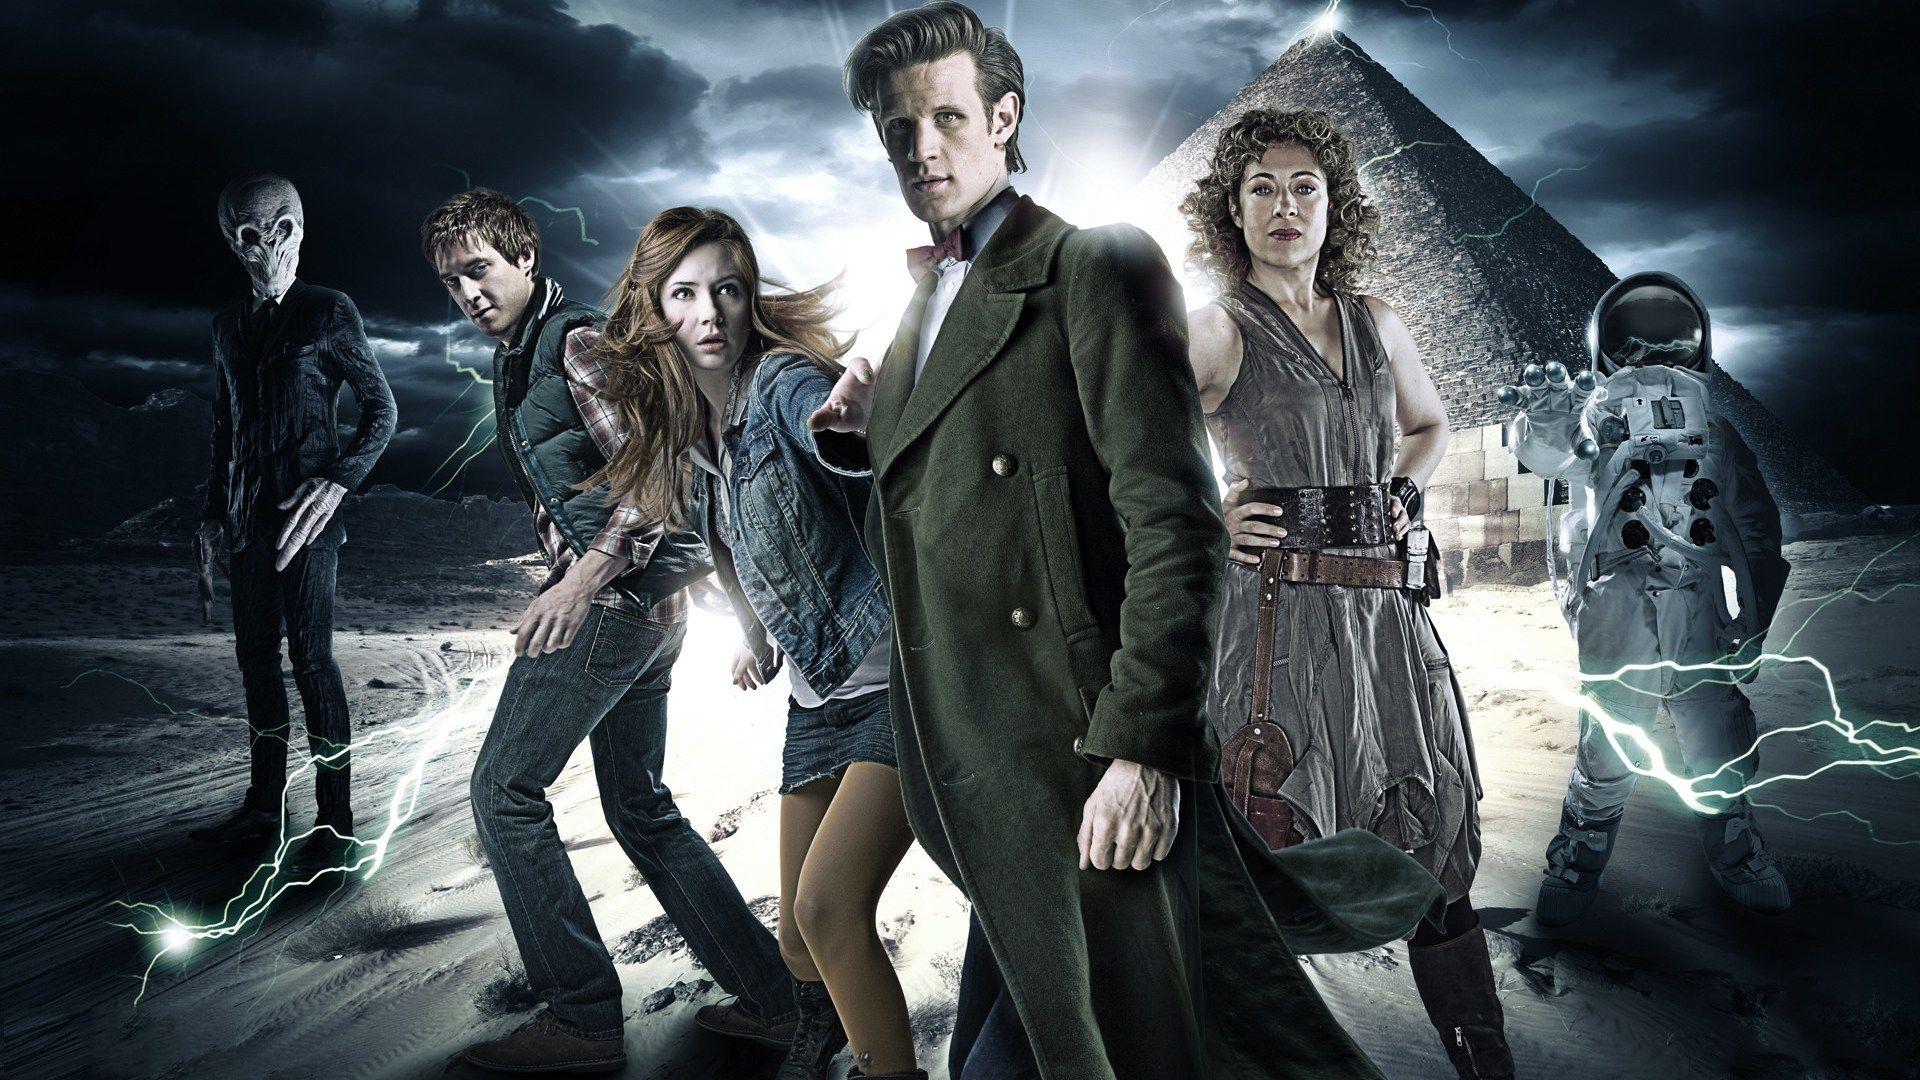 11th Doctor Who HD Wallpaper Free 11th Doctor Who HD